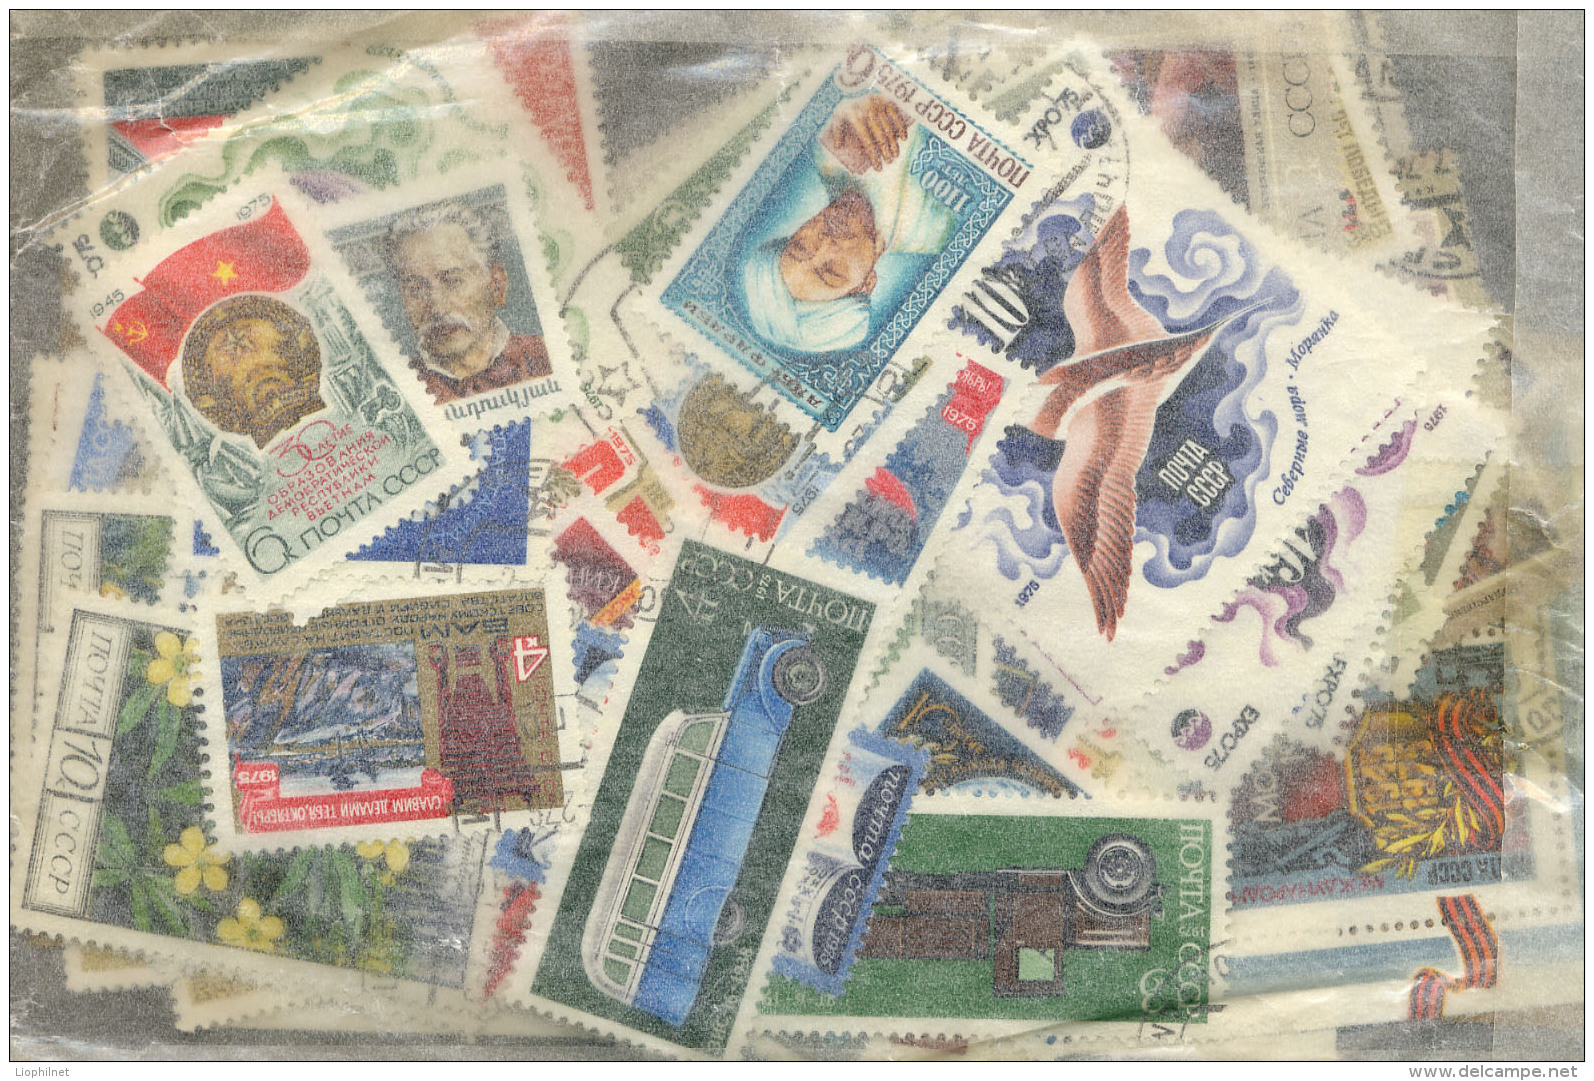 URSS SU 1975, ANNEE COMPLETE, COMPLETE YEAR SET, STAMPS + BLOCKS, TIMBRES ET BLOCS, OBLITERES / USED CTO - Full Years